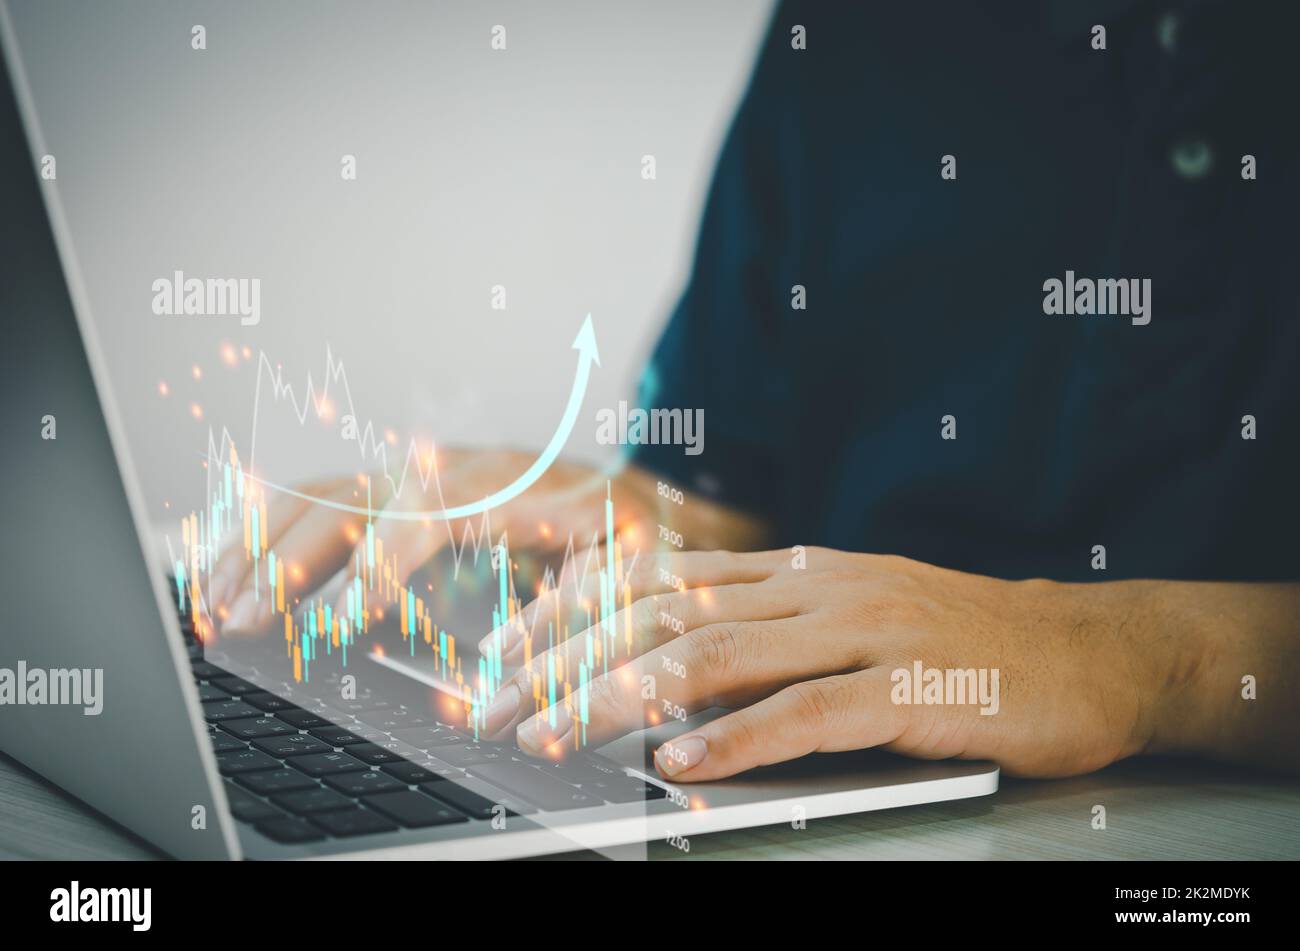 Man hands using computers to analyze data and investment charts. Financial trading plans and digital banking technology marketing. Stock Photo